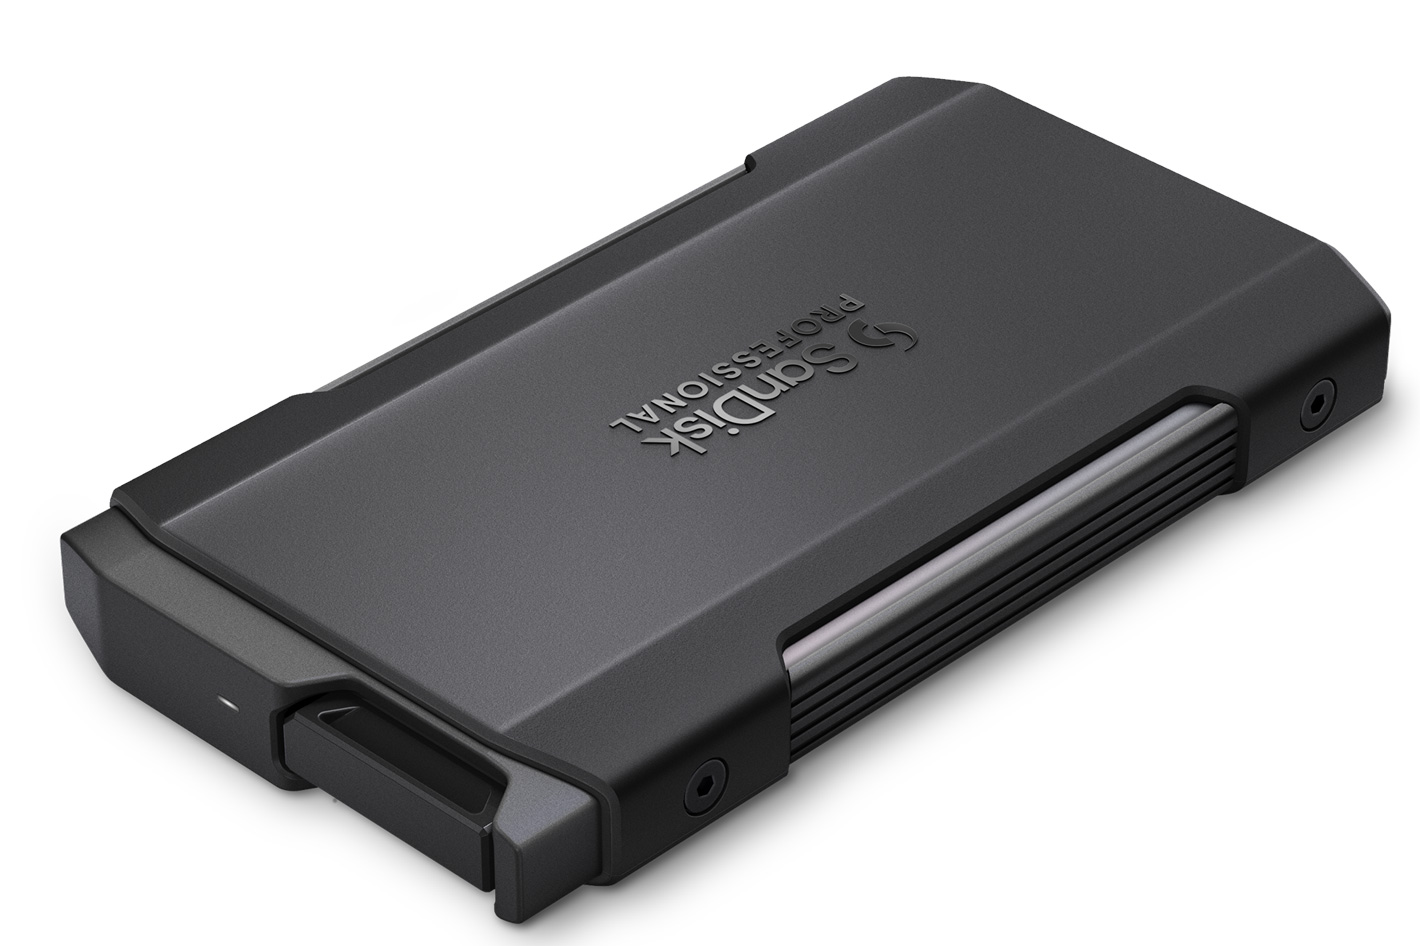 SanDisk Professional PRO-BLADE SSD: a system designed for content creators